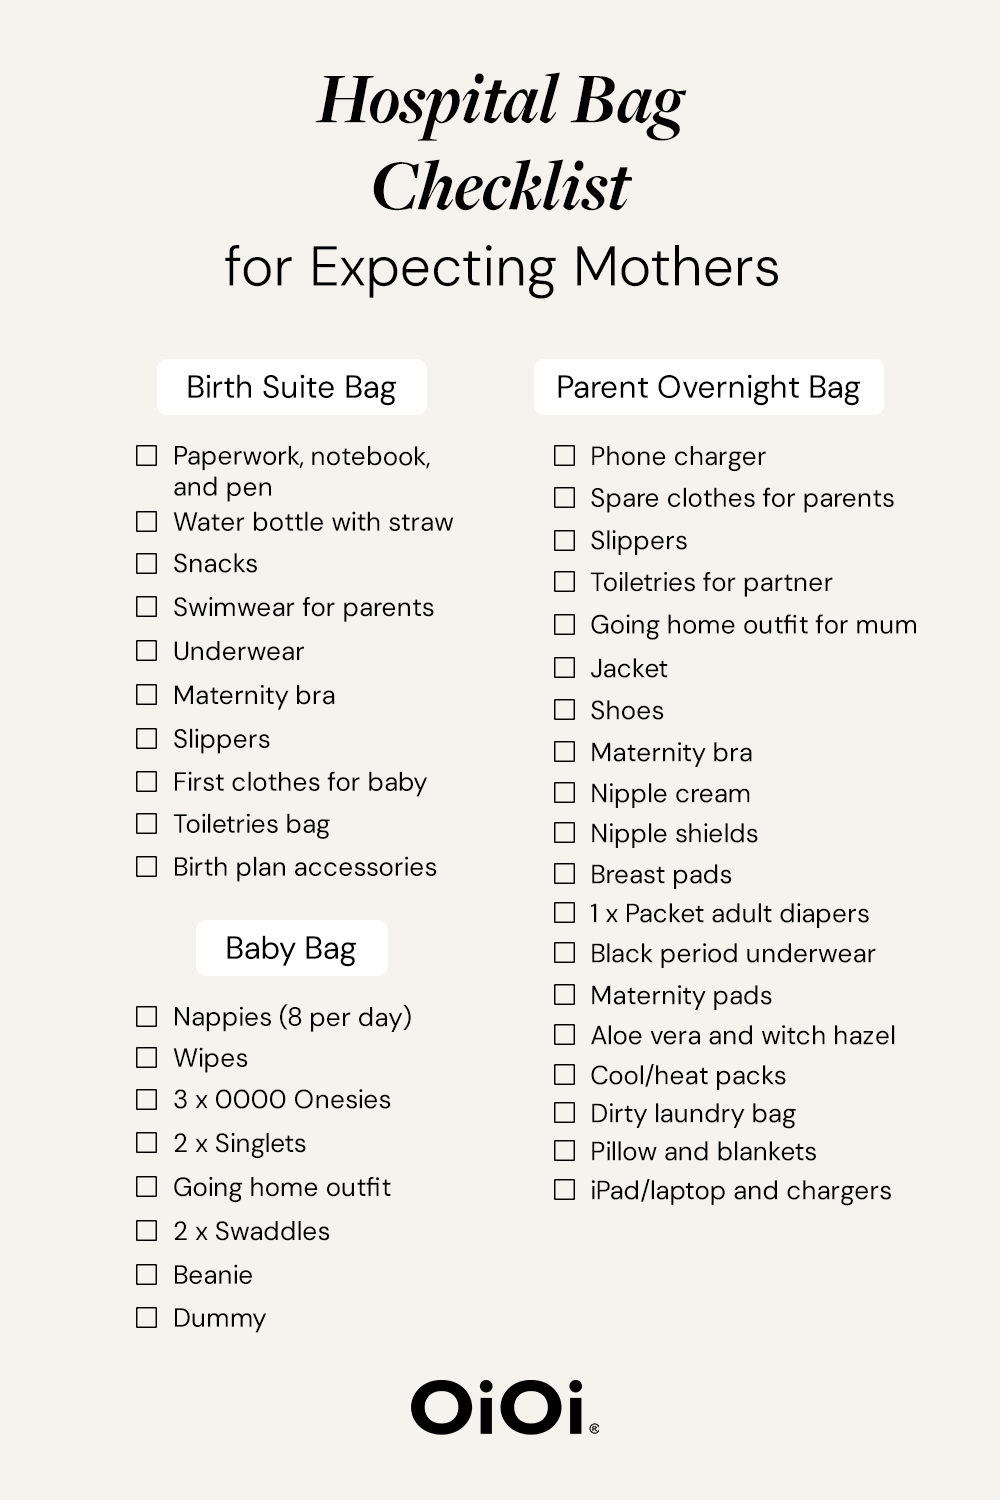 Hospital Bag Checklist for Expecting Mothers